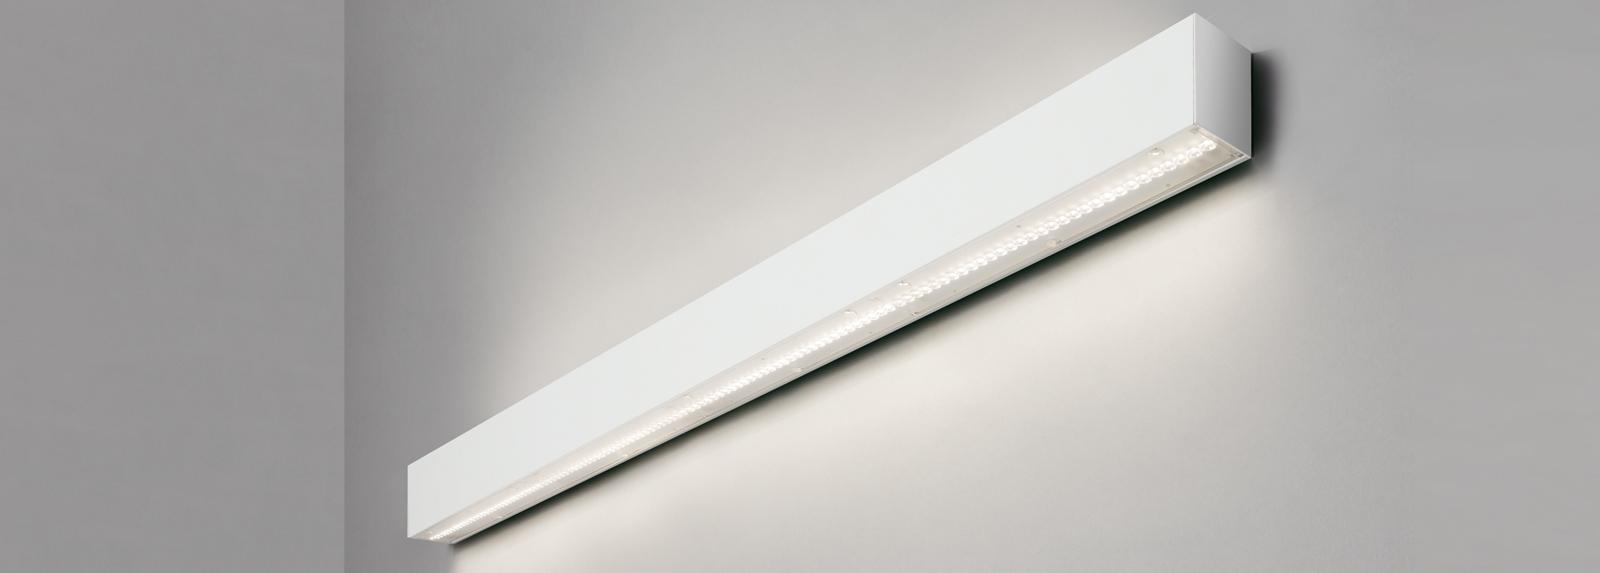 HORIZON 700 | IP66 Two sided-emission wall-mounted linear luminaires